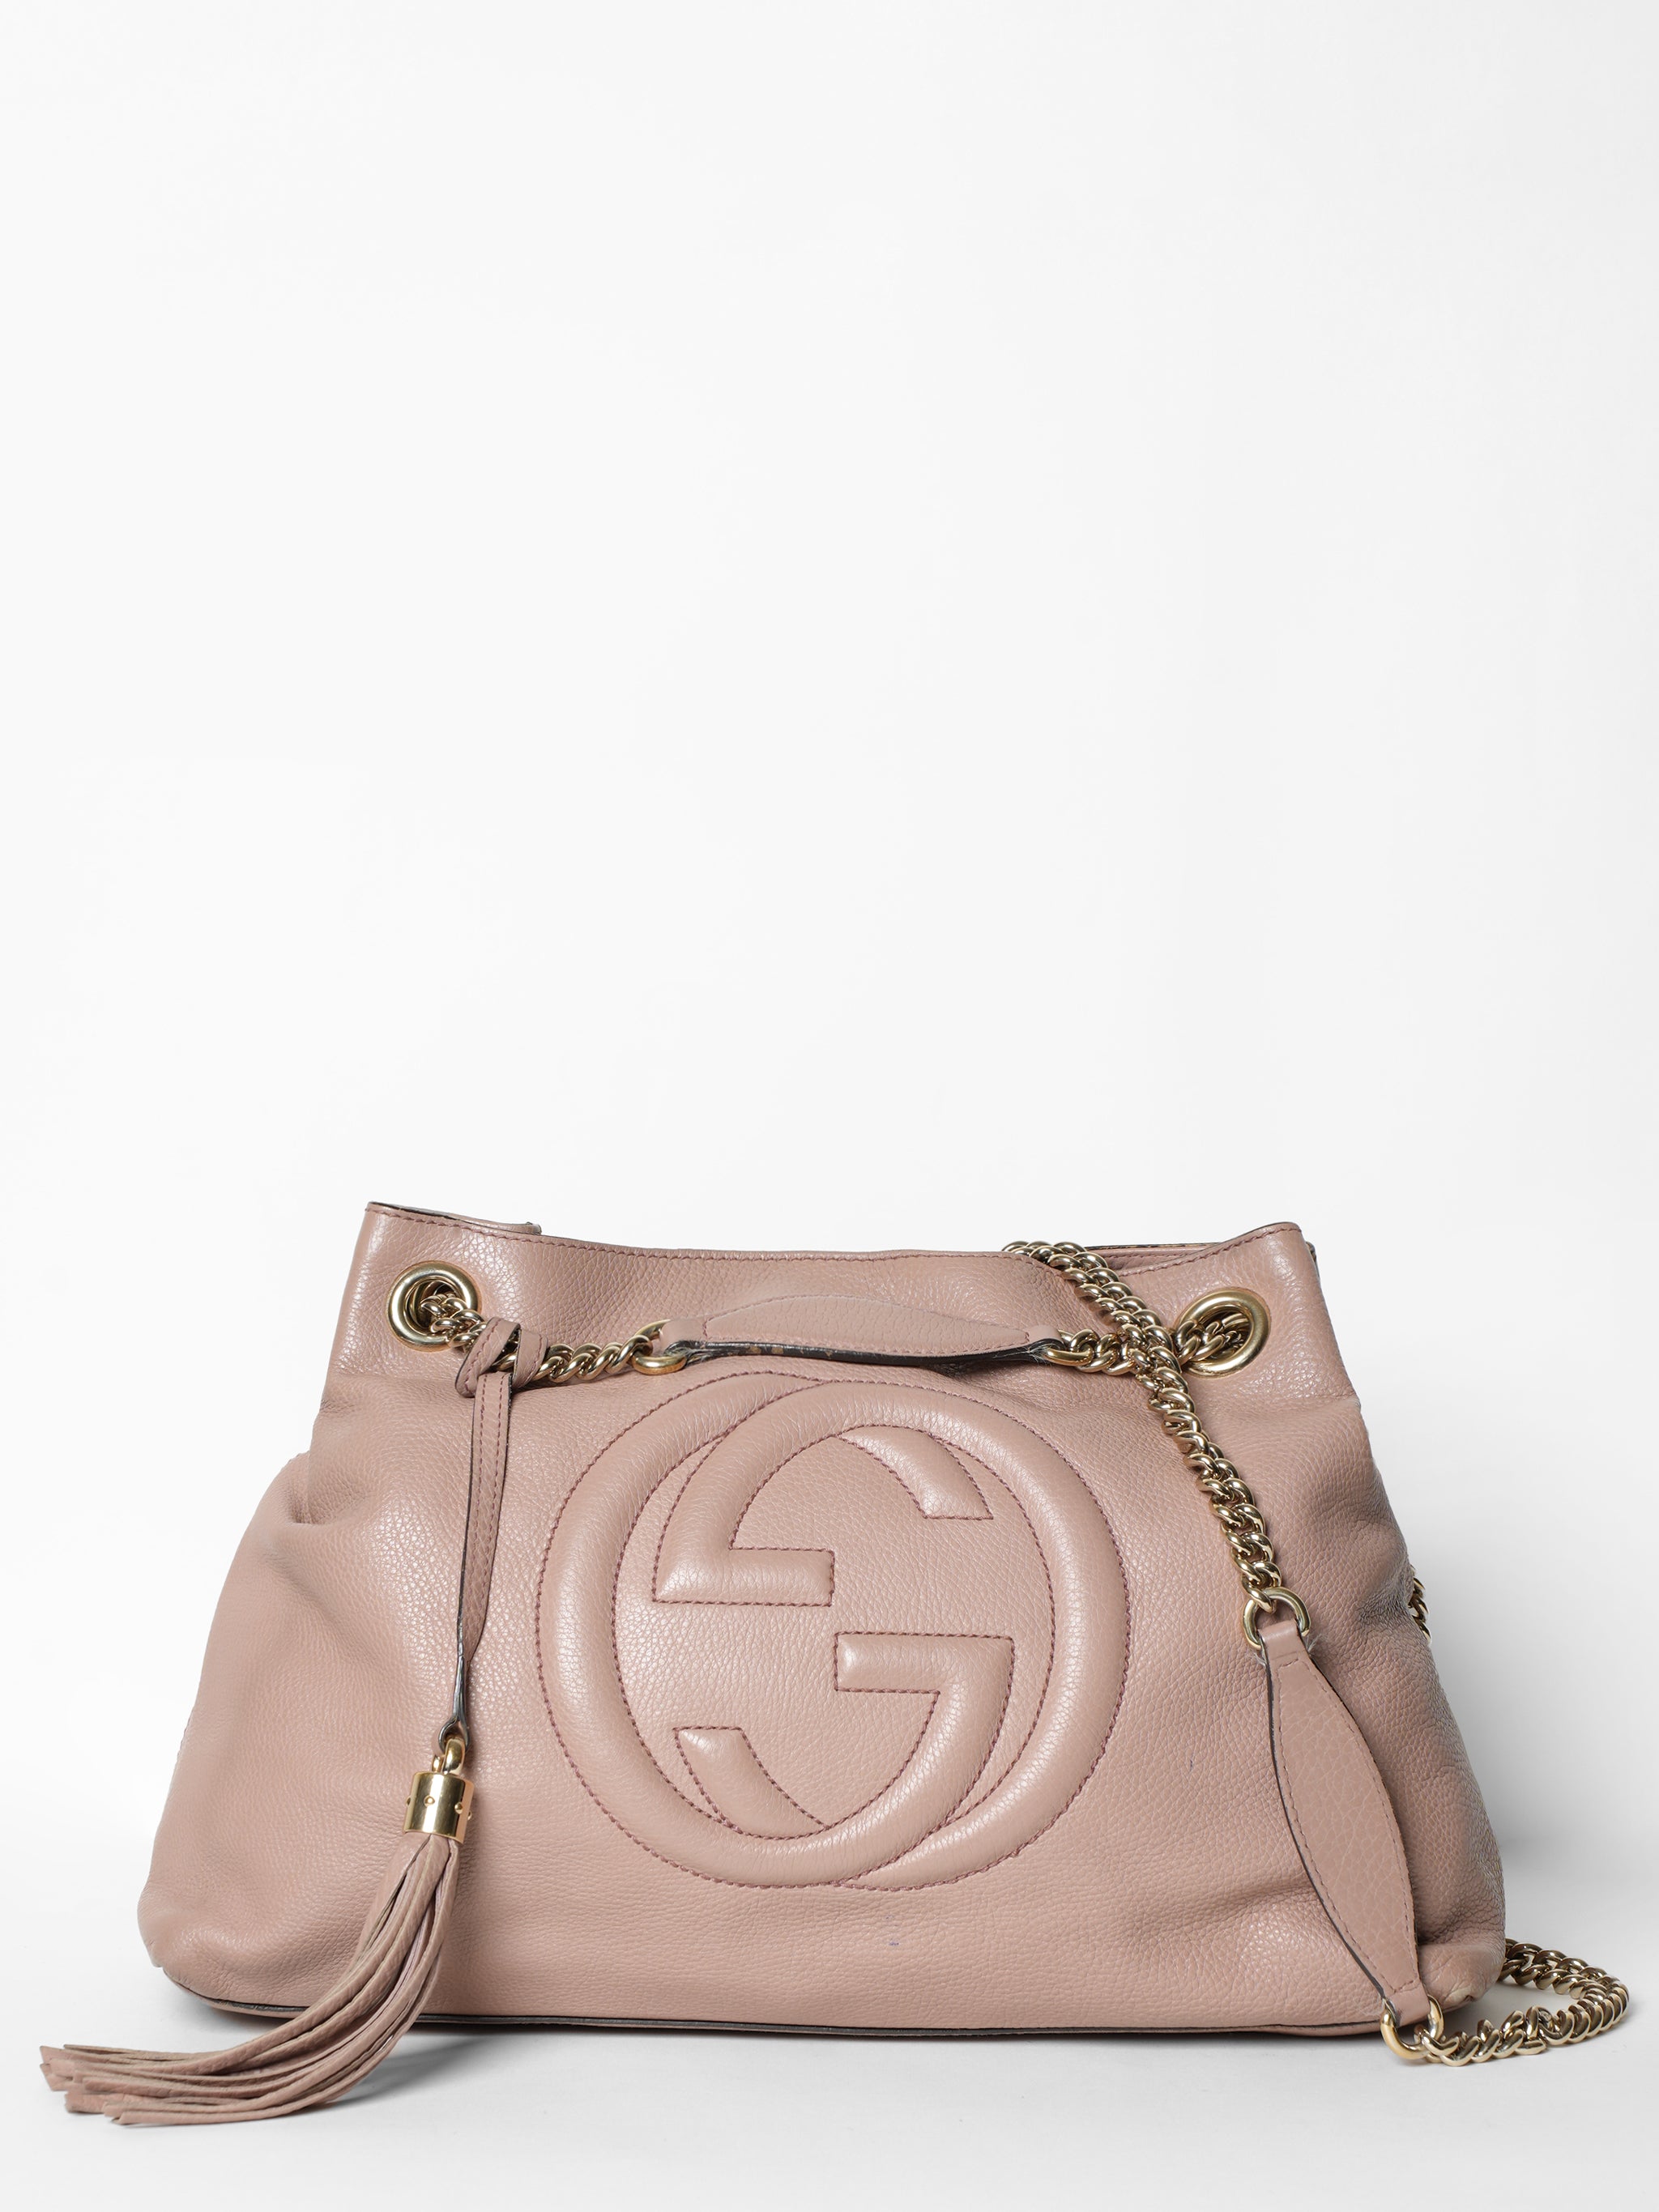 Gucci Old Rose Leather Soho Tote Bag